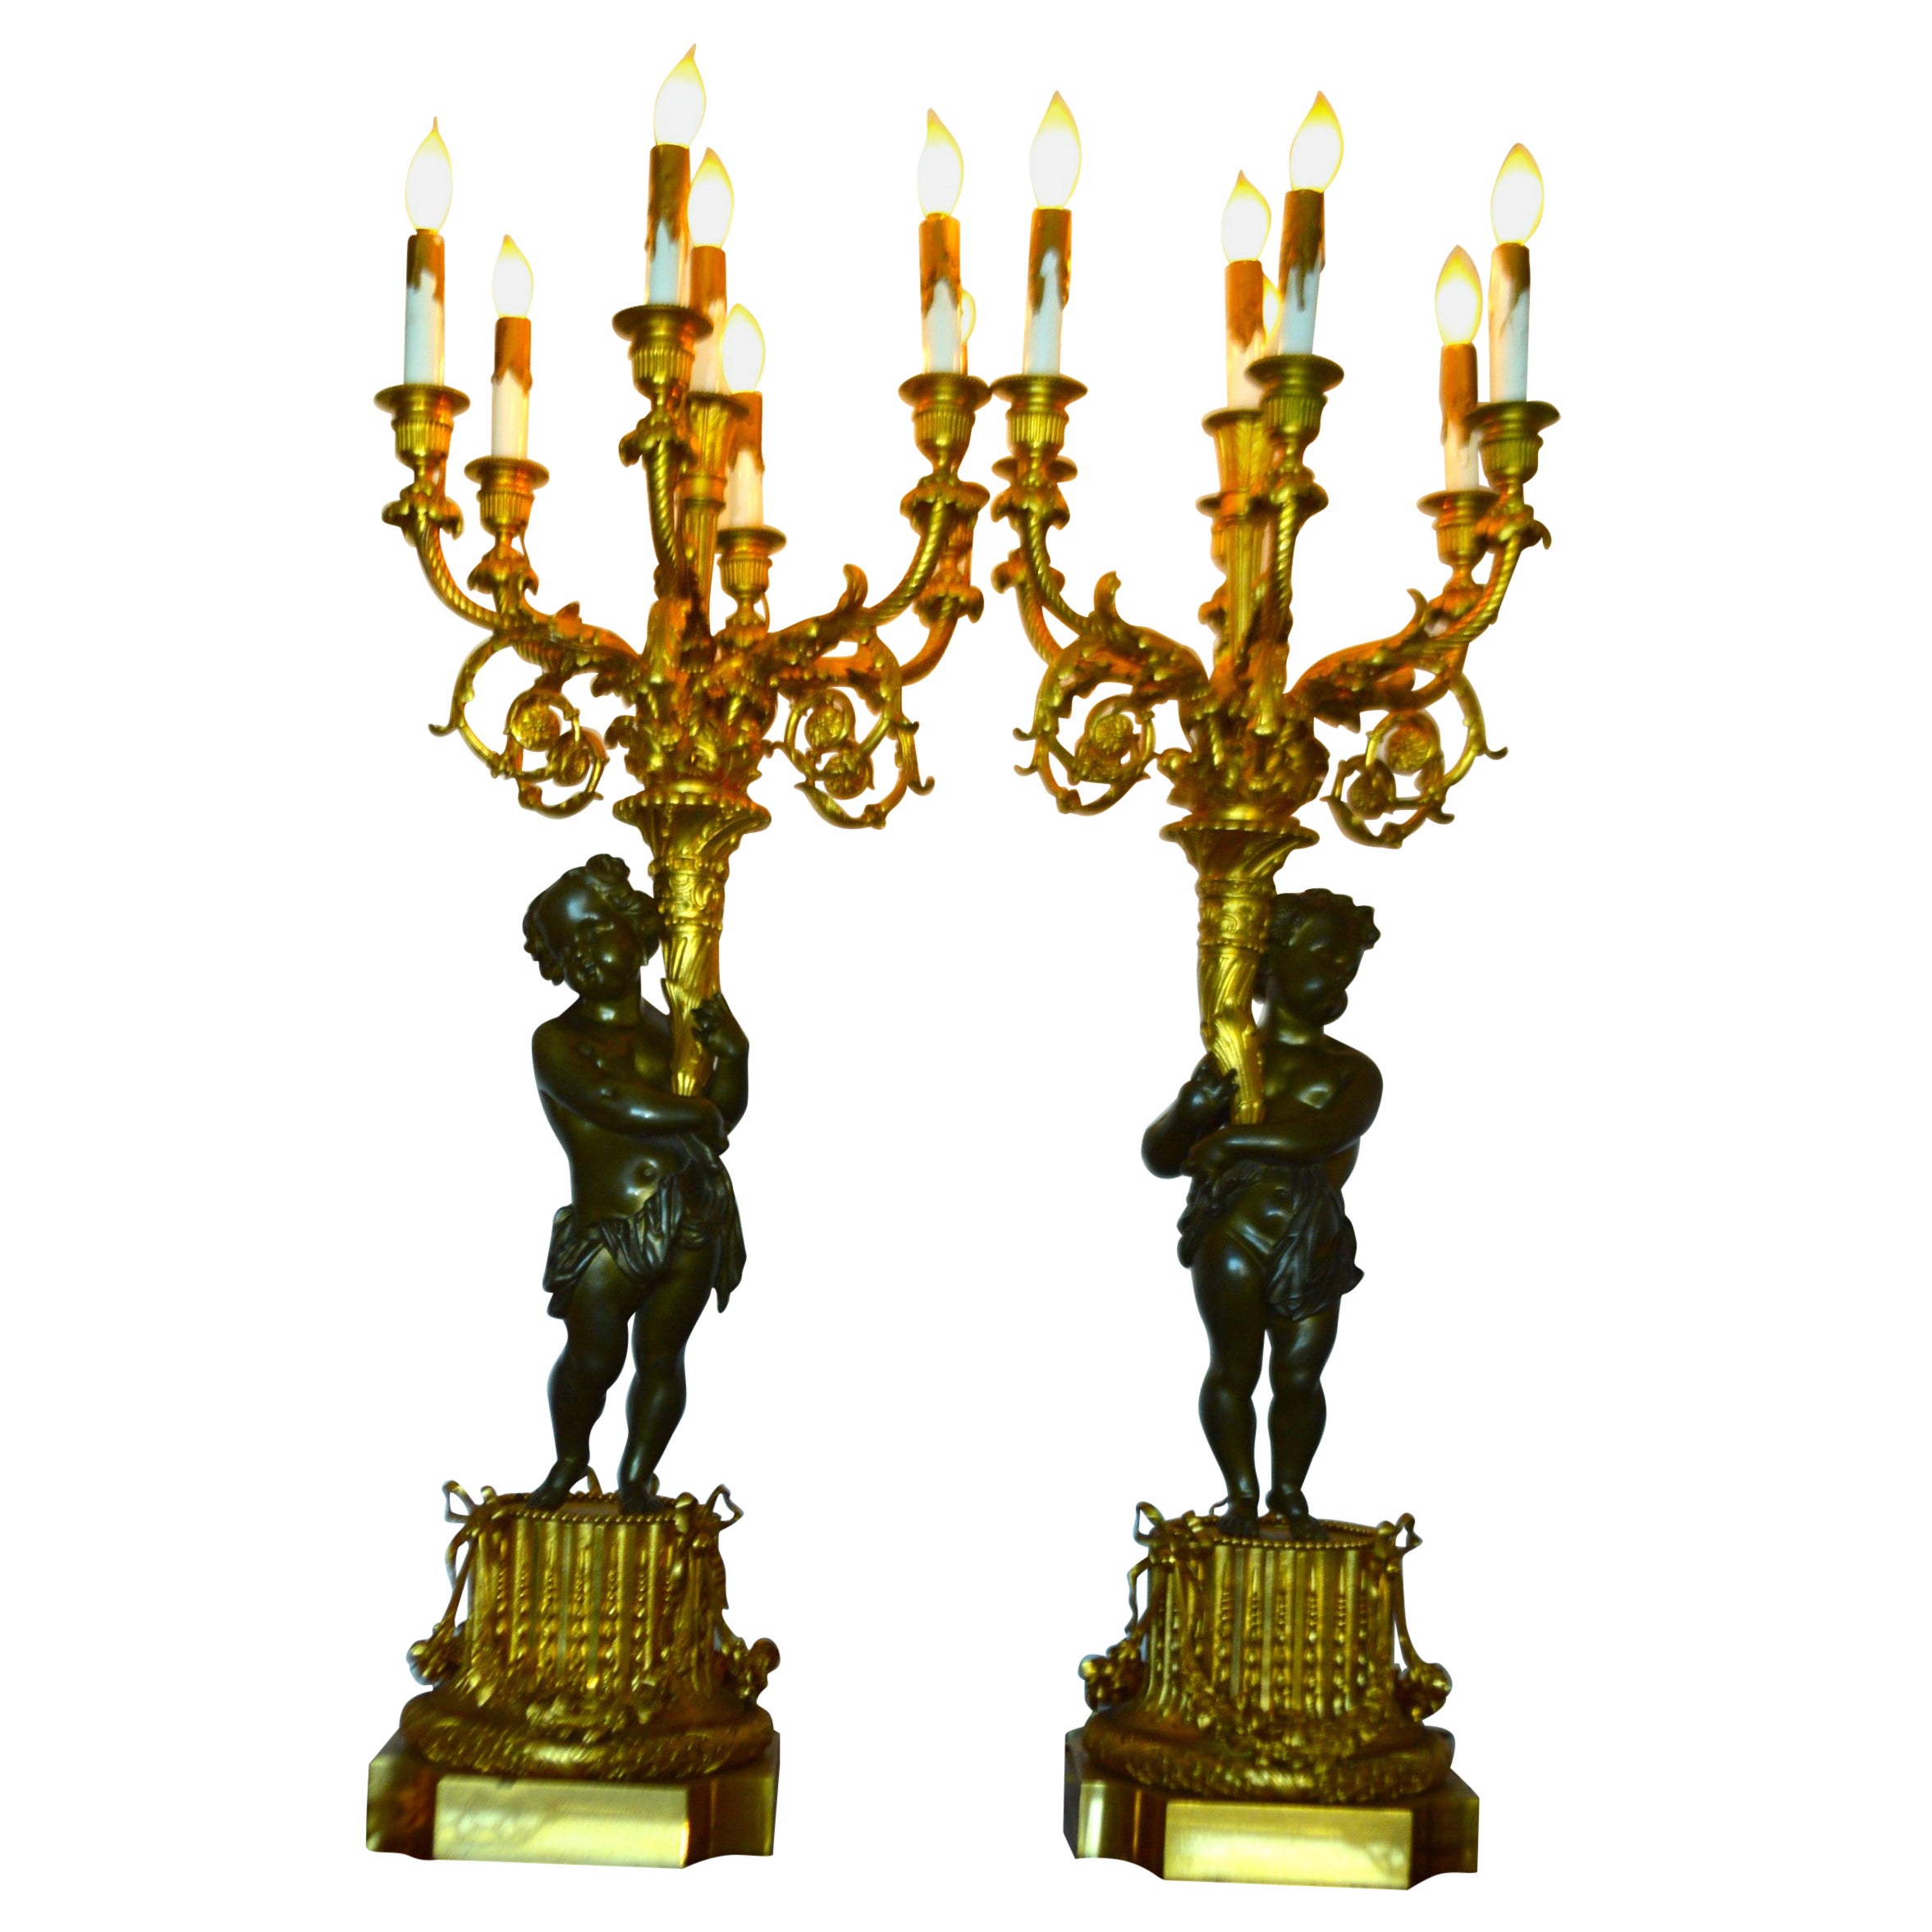 True Pair of electrified gilded bronze candelabras, 7 lights, male, female putti